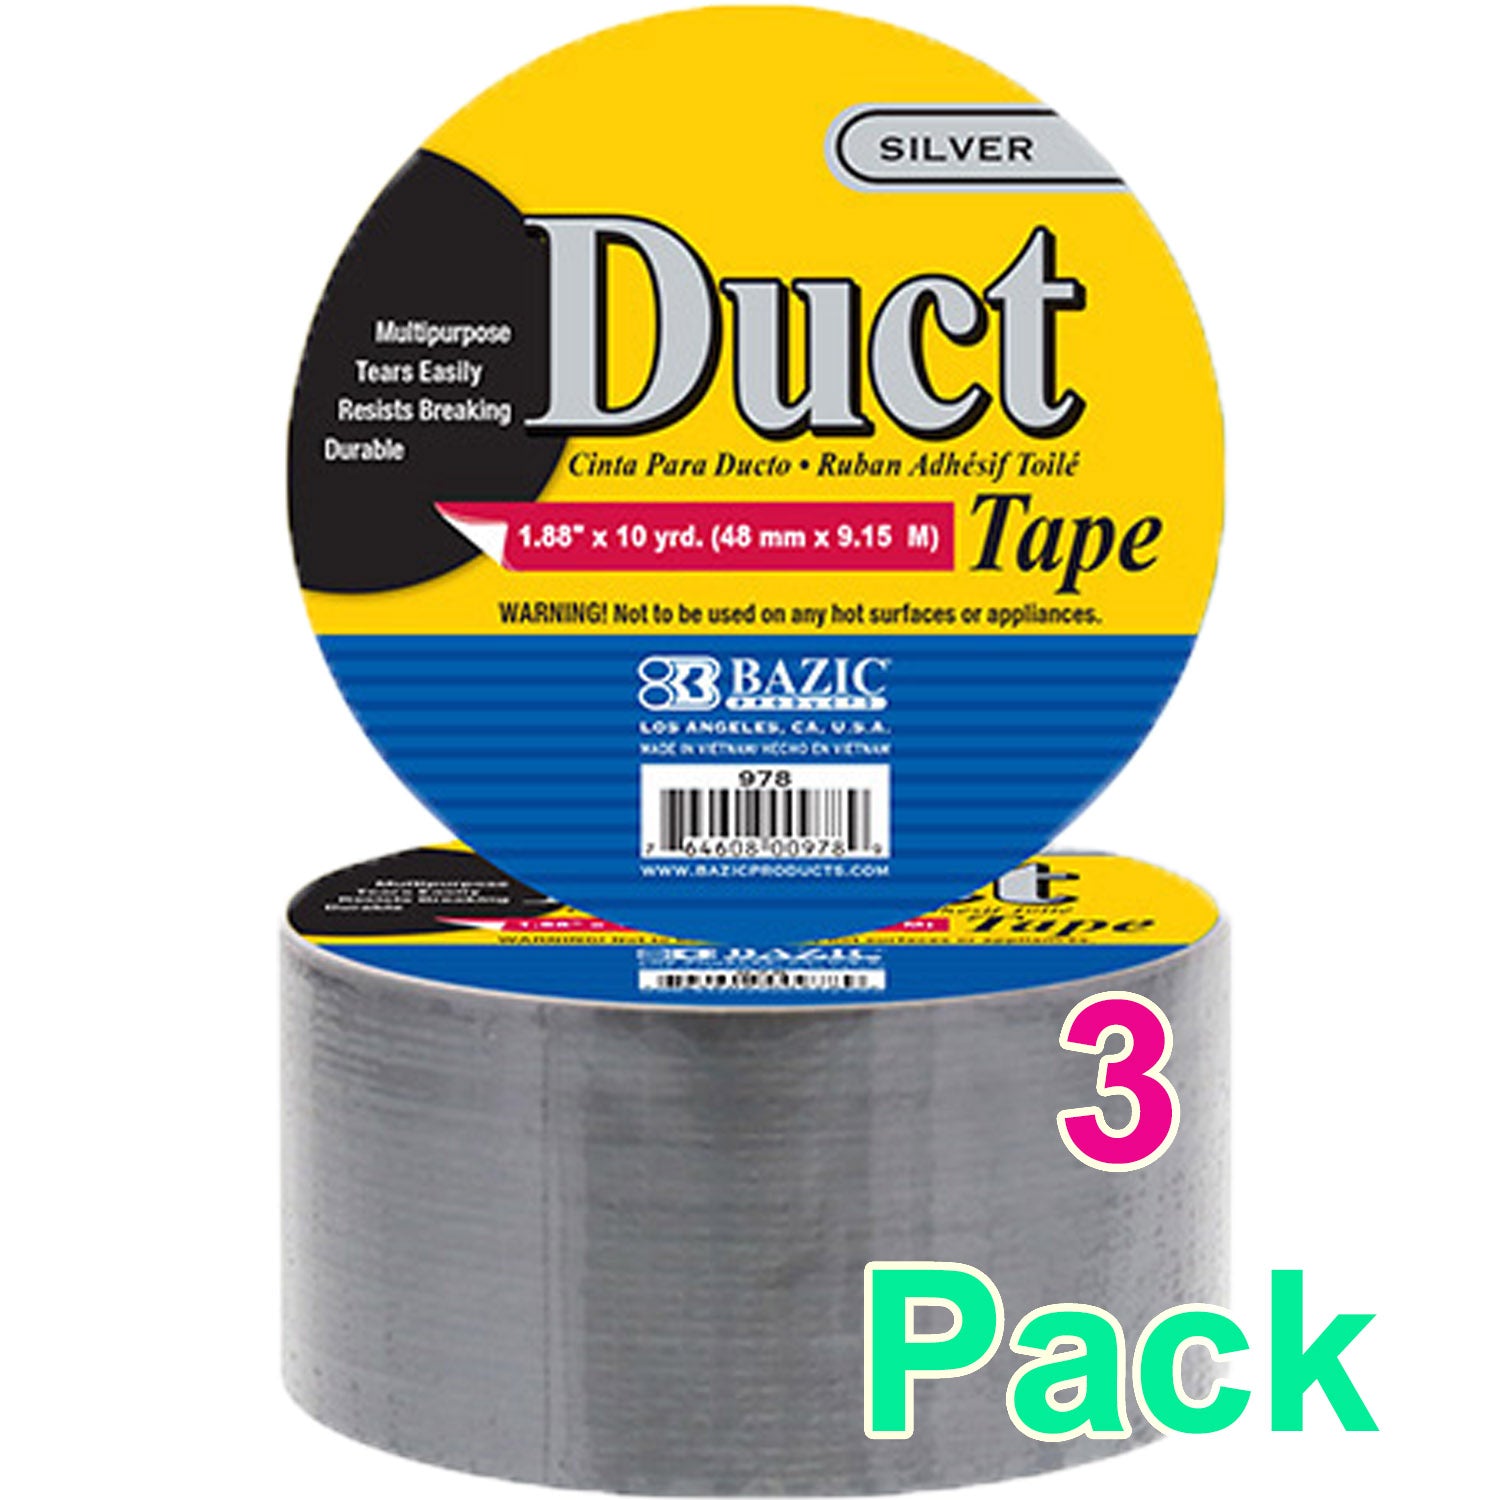 Duct Tape Silver Color Roll | 1.88